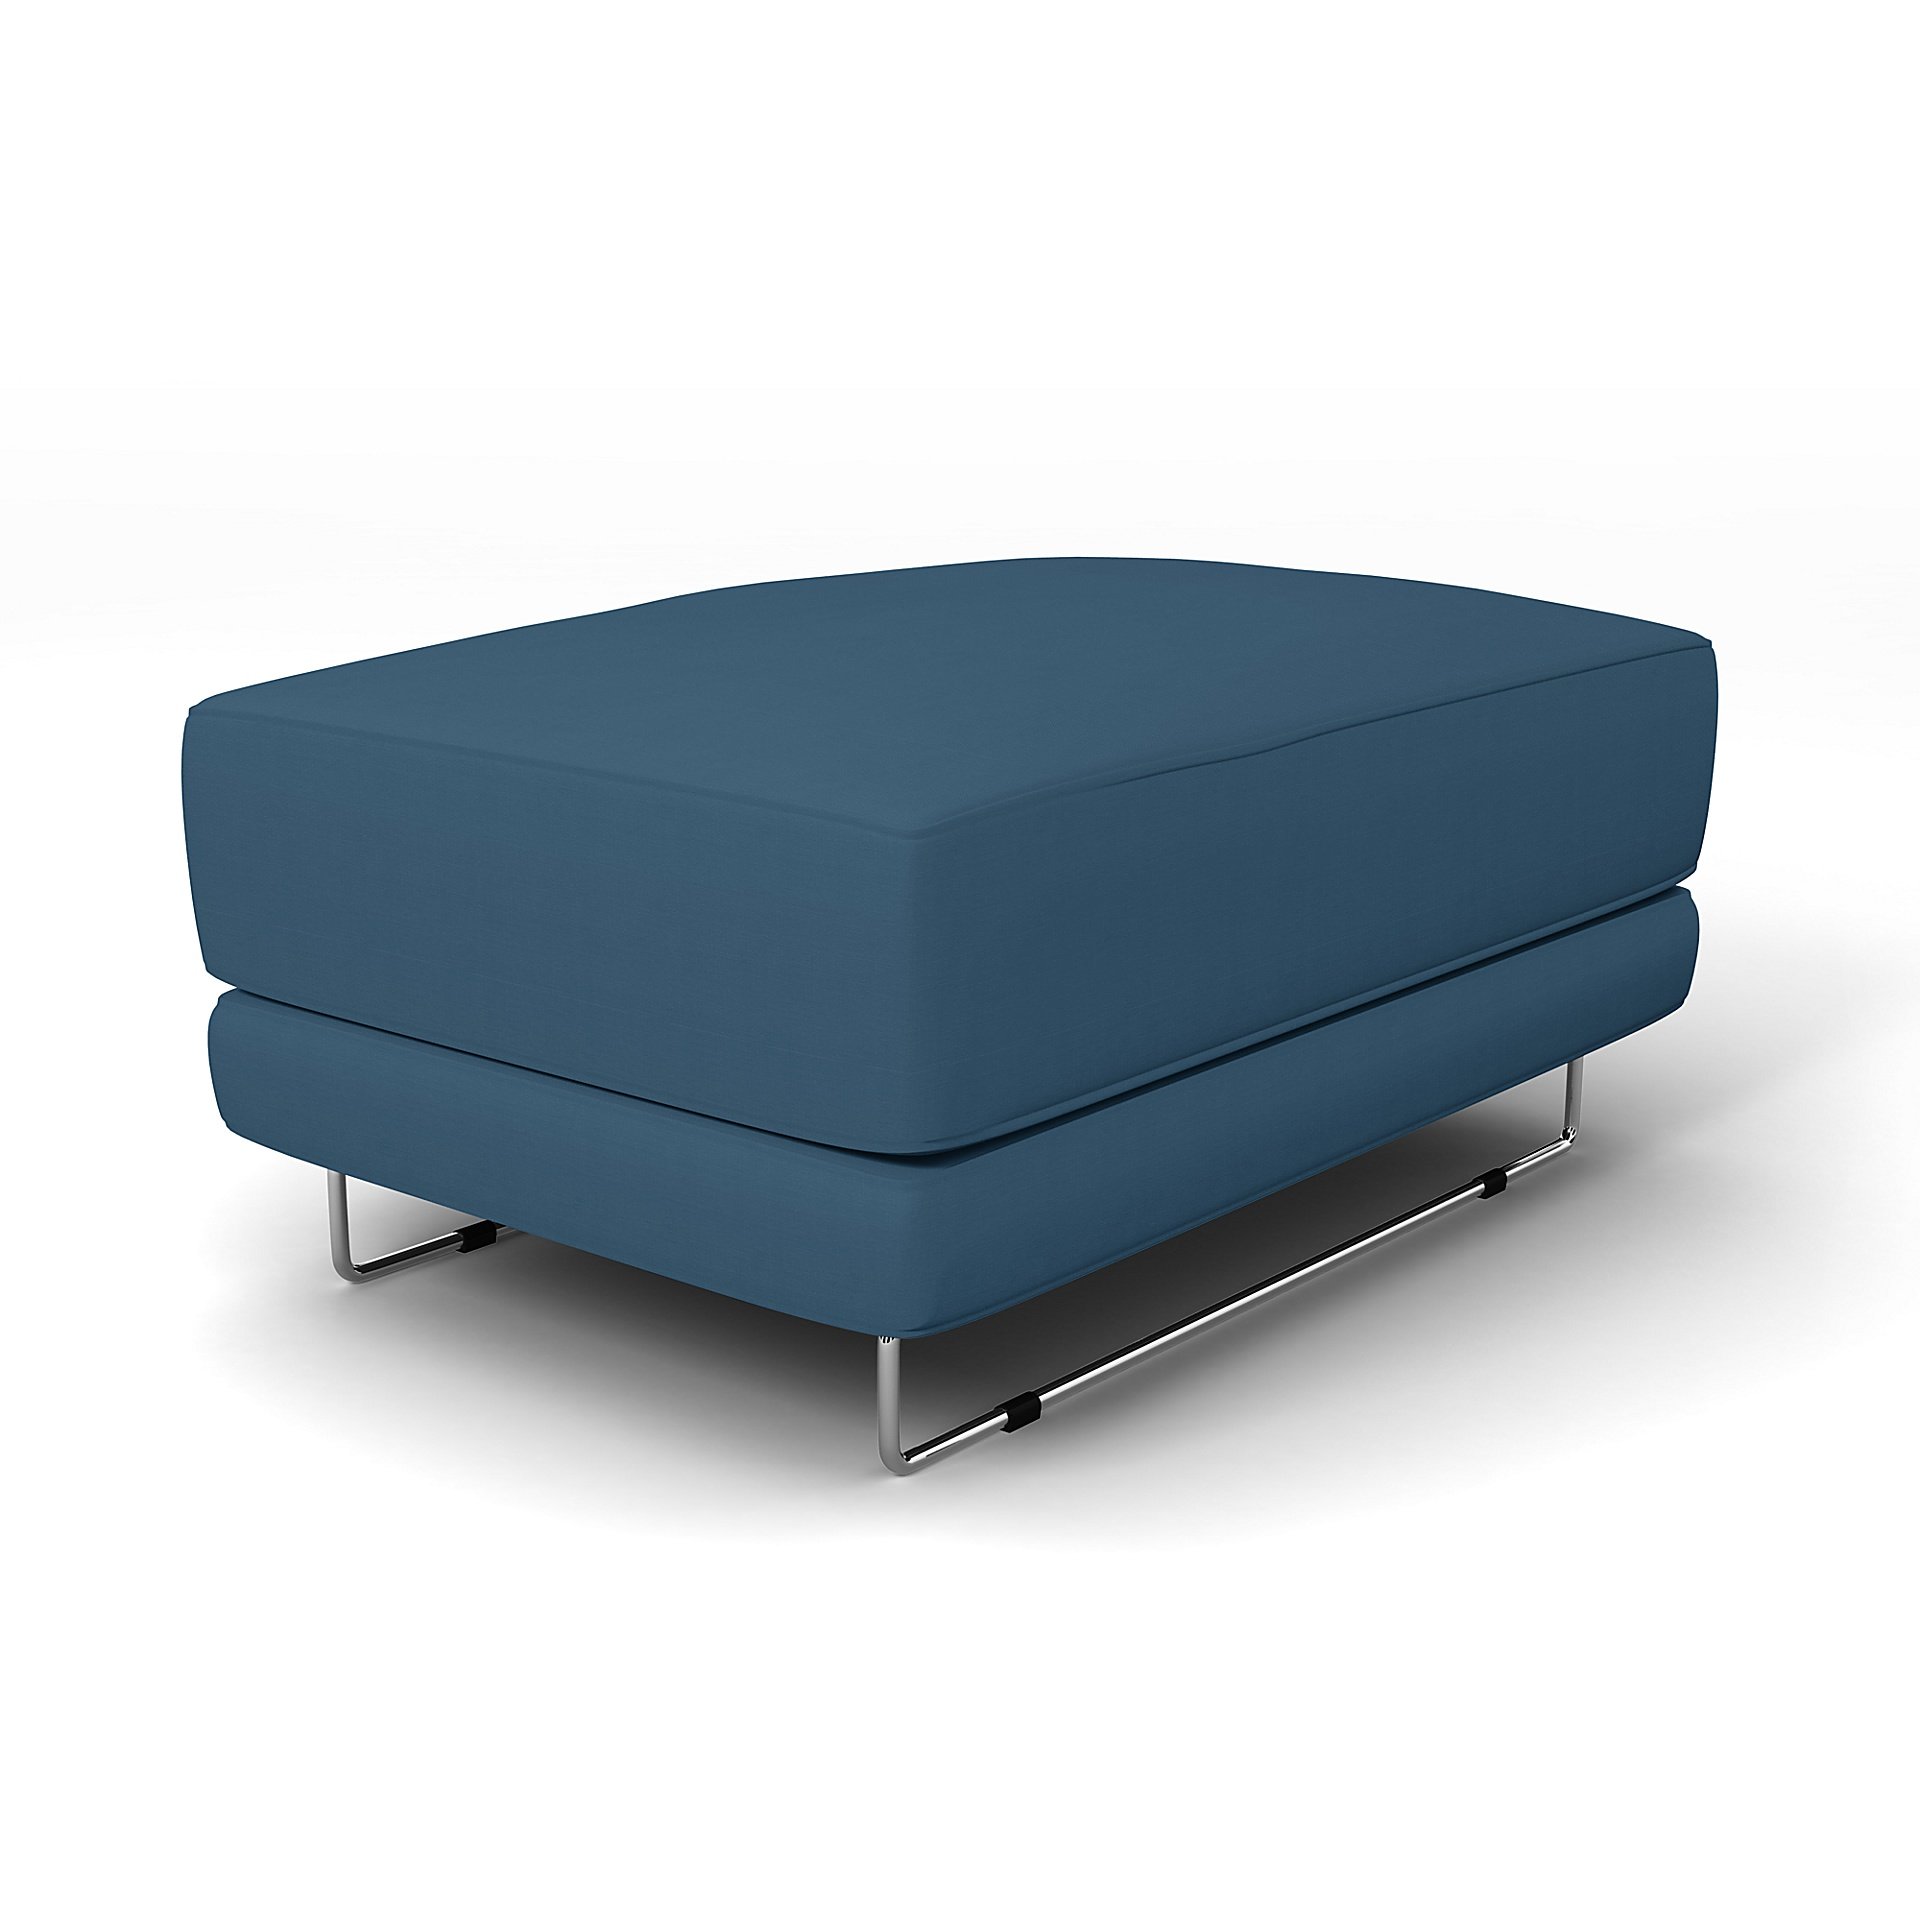 IKEA - Tylosand Footstool Cover, Real Teal, Cotton - Bemz